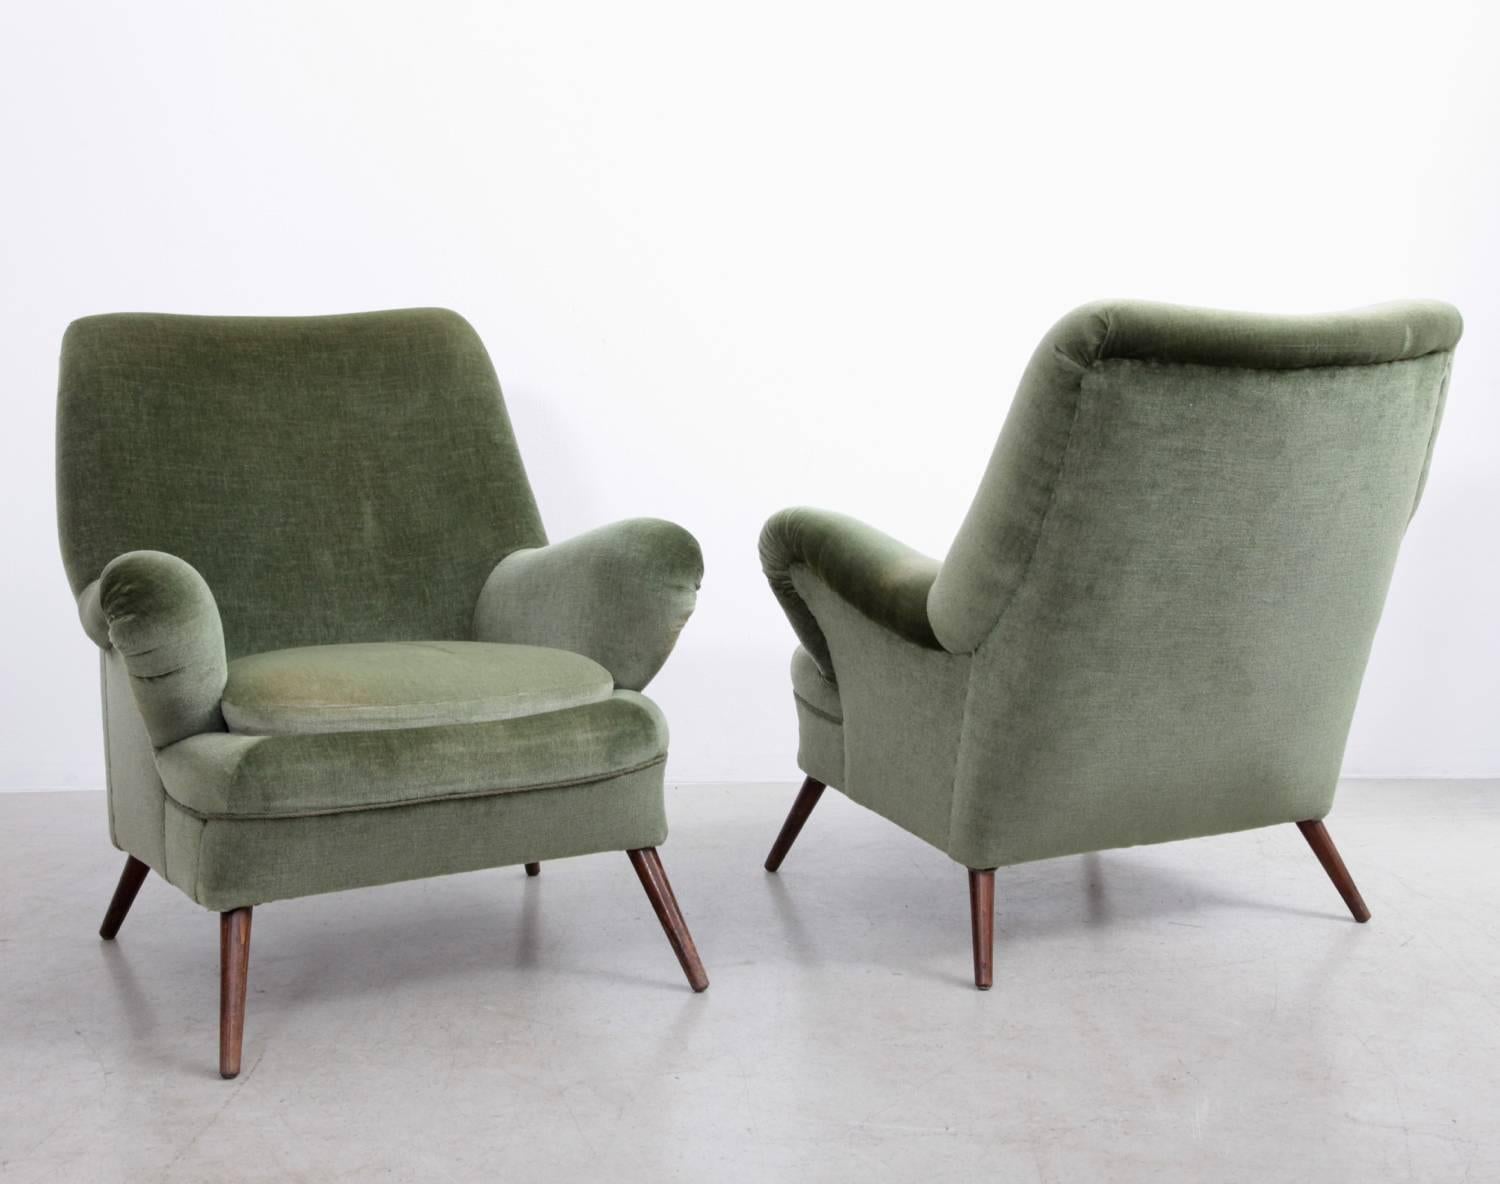 Mid-Century Modern Pair of Large Sculptural 1950s Lounge Chair in Green Mohair Fabric